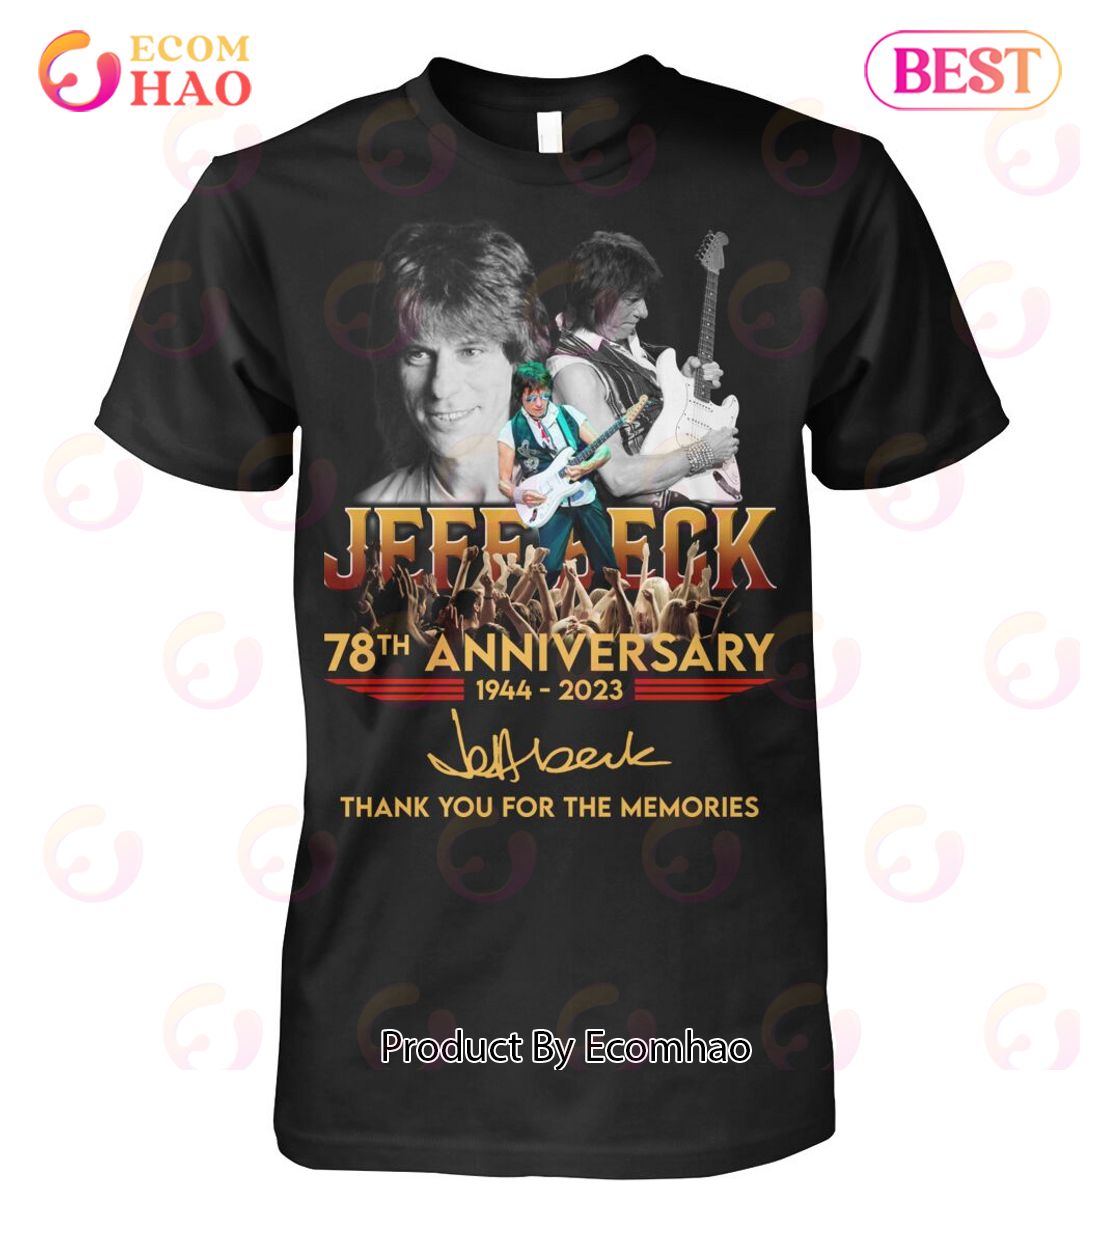 Jeff Beck 78th Anniversary 1944 - 2023 Thank You For The Memories T-Shirt